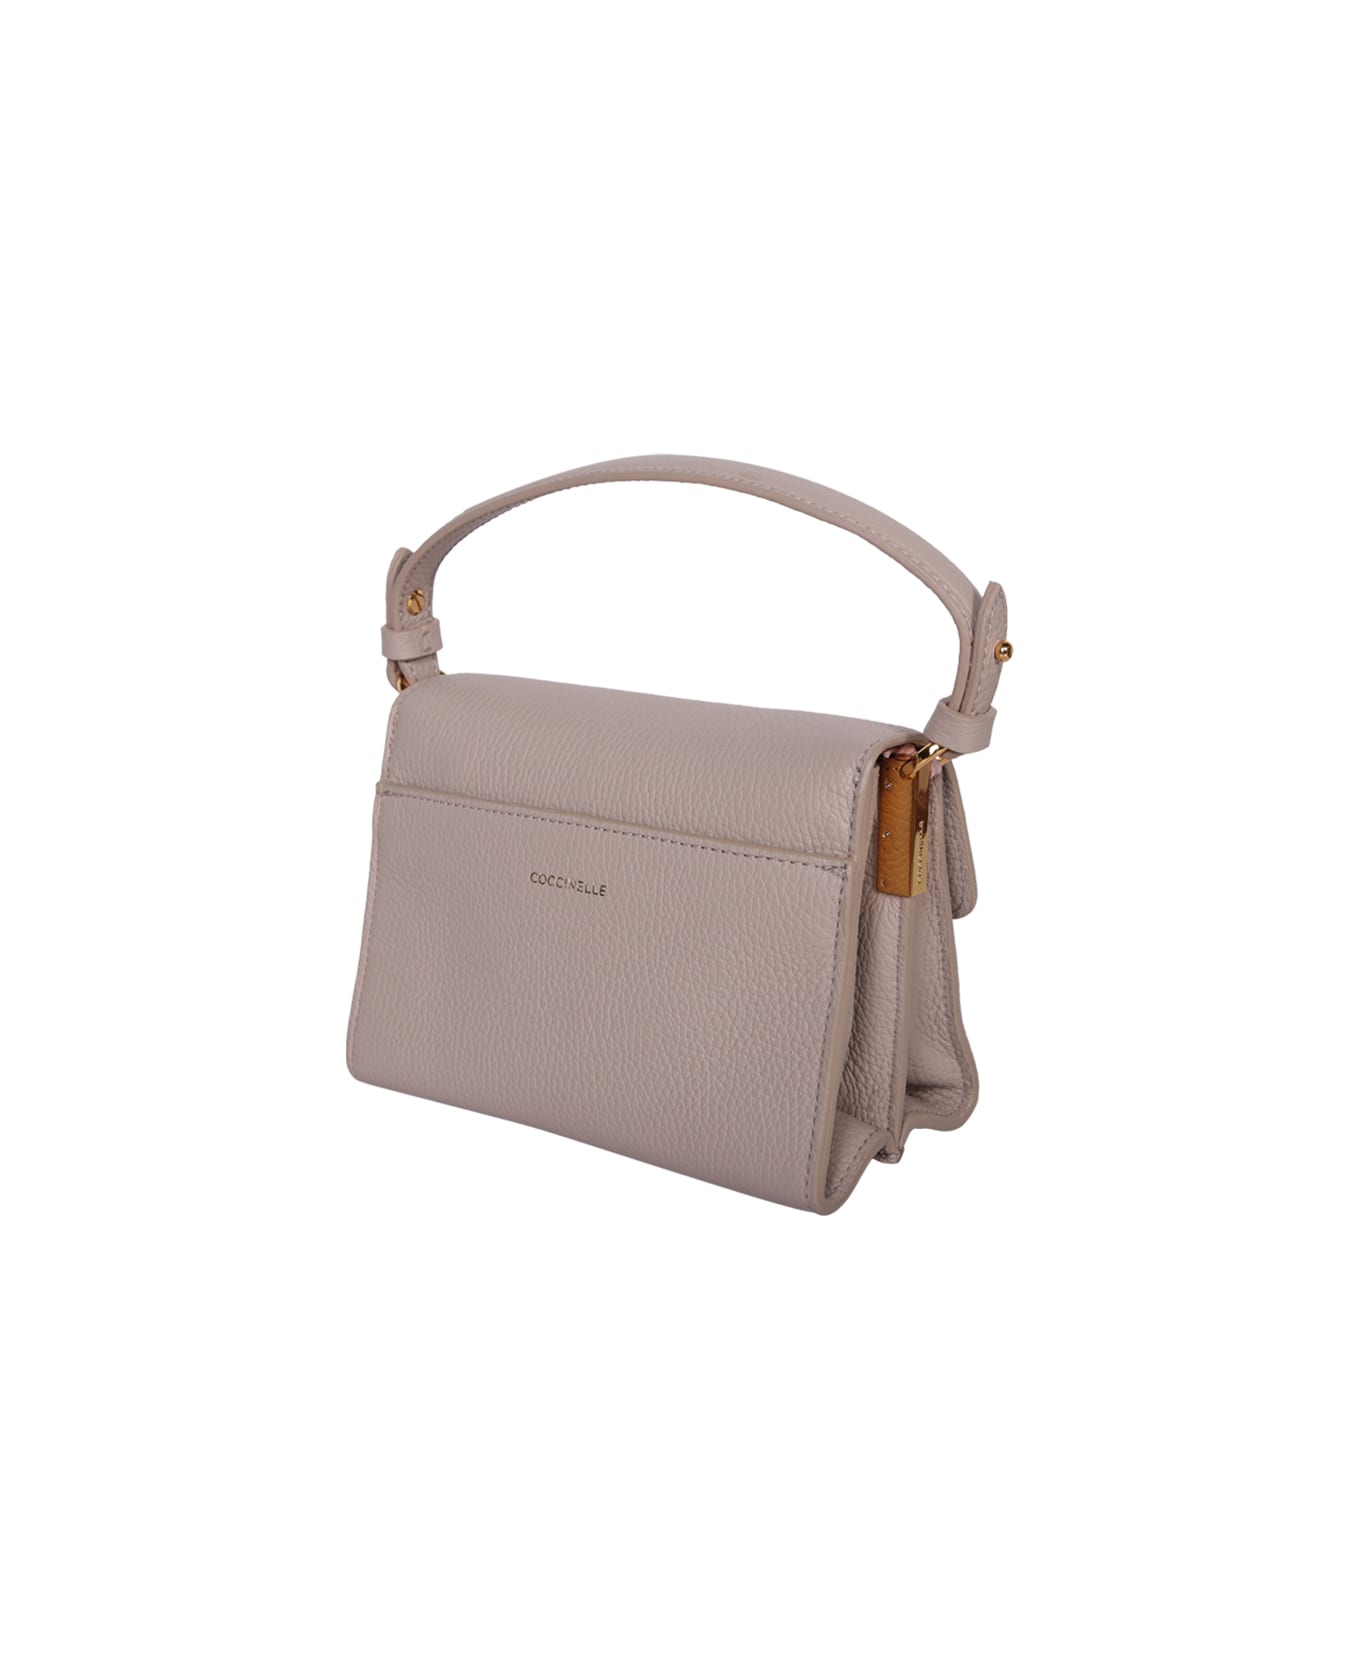 Coccinelle Binxie Mini Top Handle Bag In Powder Pink - Pink トートバッグ